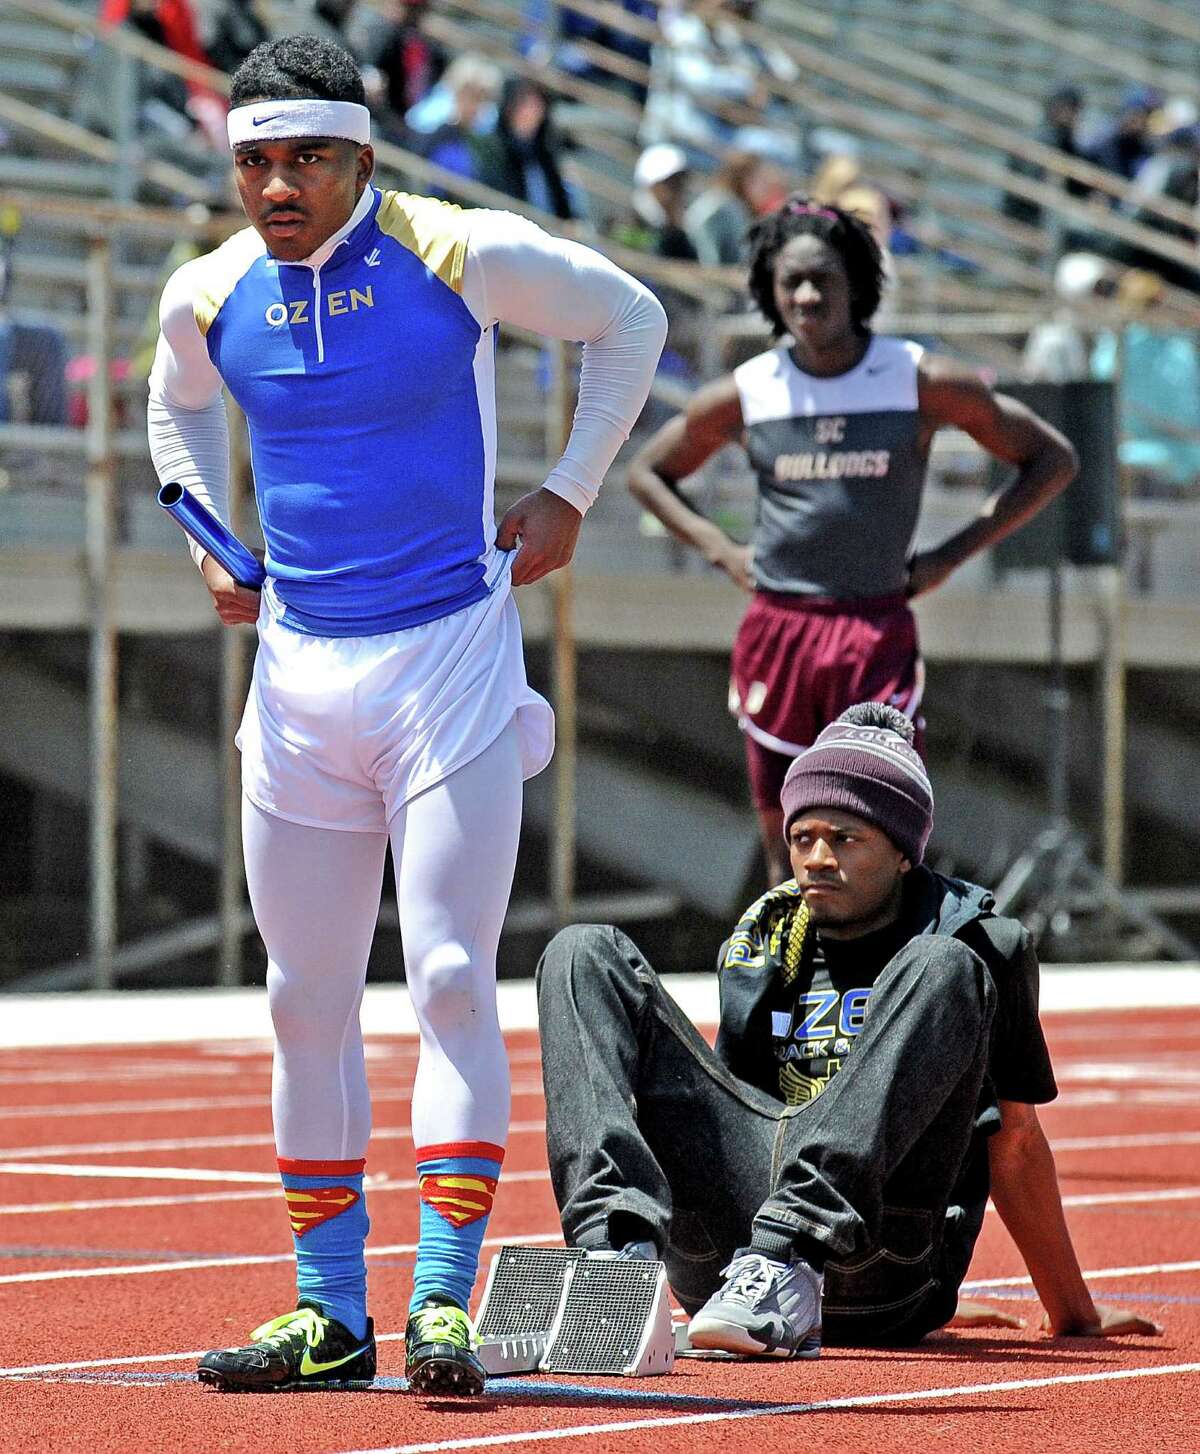 Ozen athlete Jakobi Jones stretches out in his superman socks before competing in the boys 4 x 200 meter relay during the 4A area track meet at Babe Zaharias Stadium on Friday, April 19, 2013. Photo taken: Randy Edwards/The Enterprise